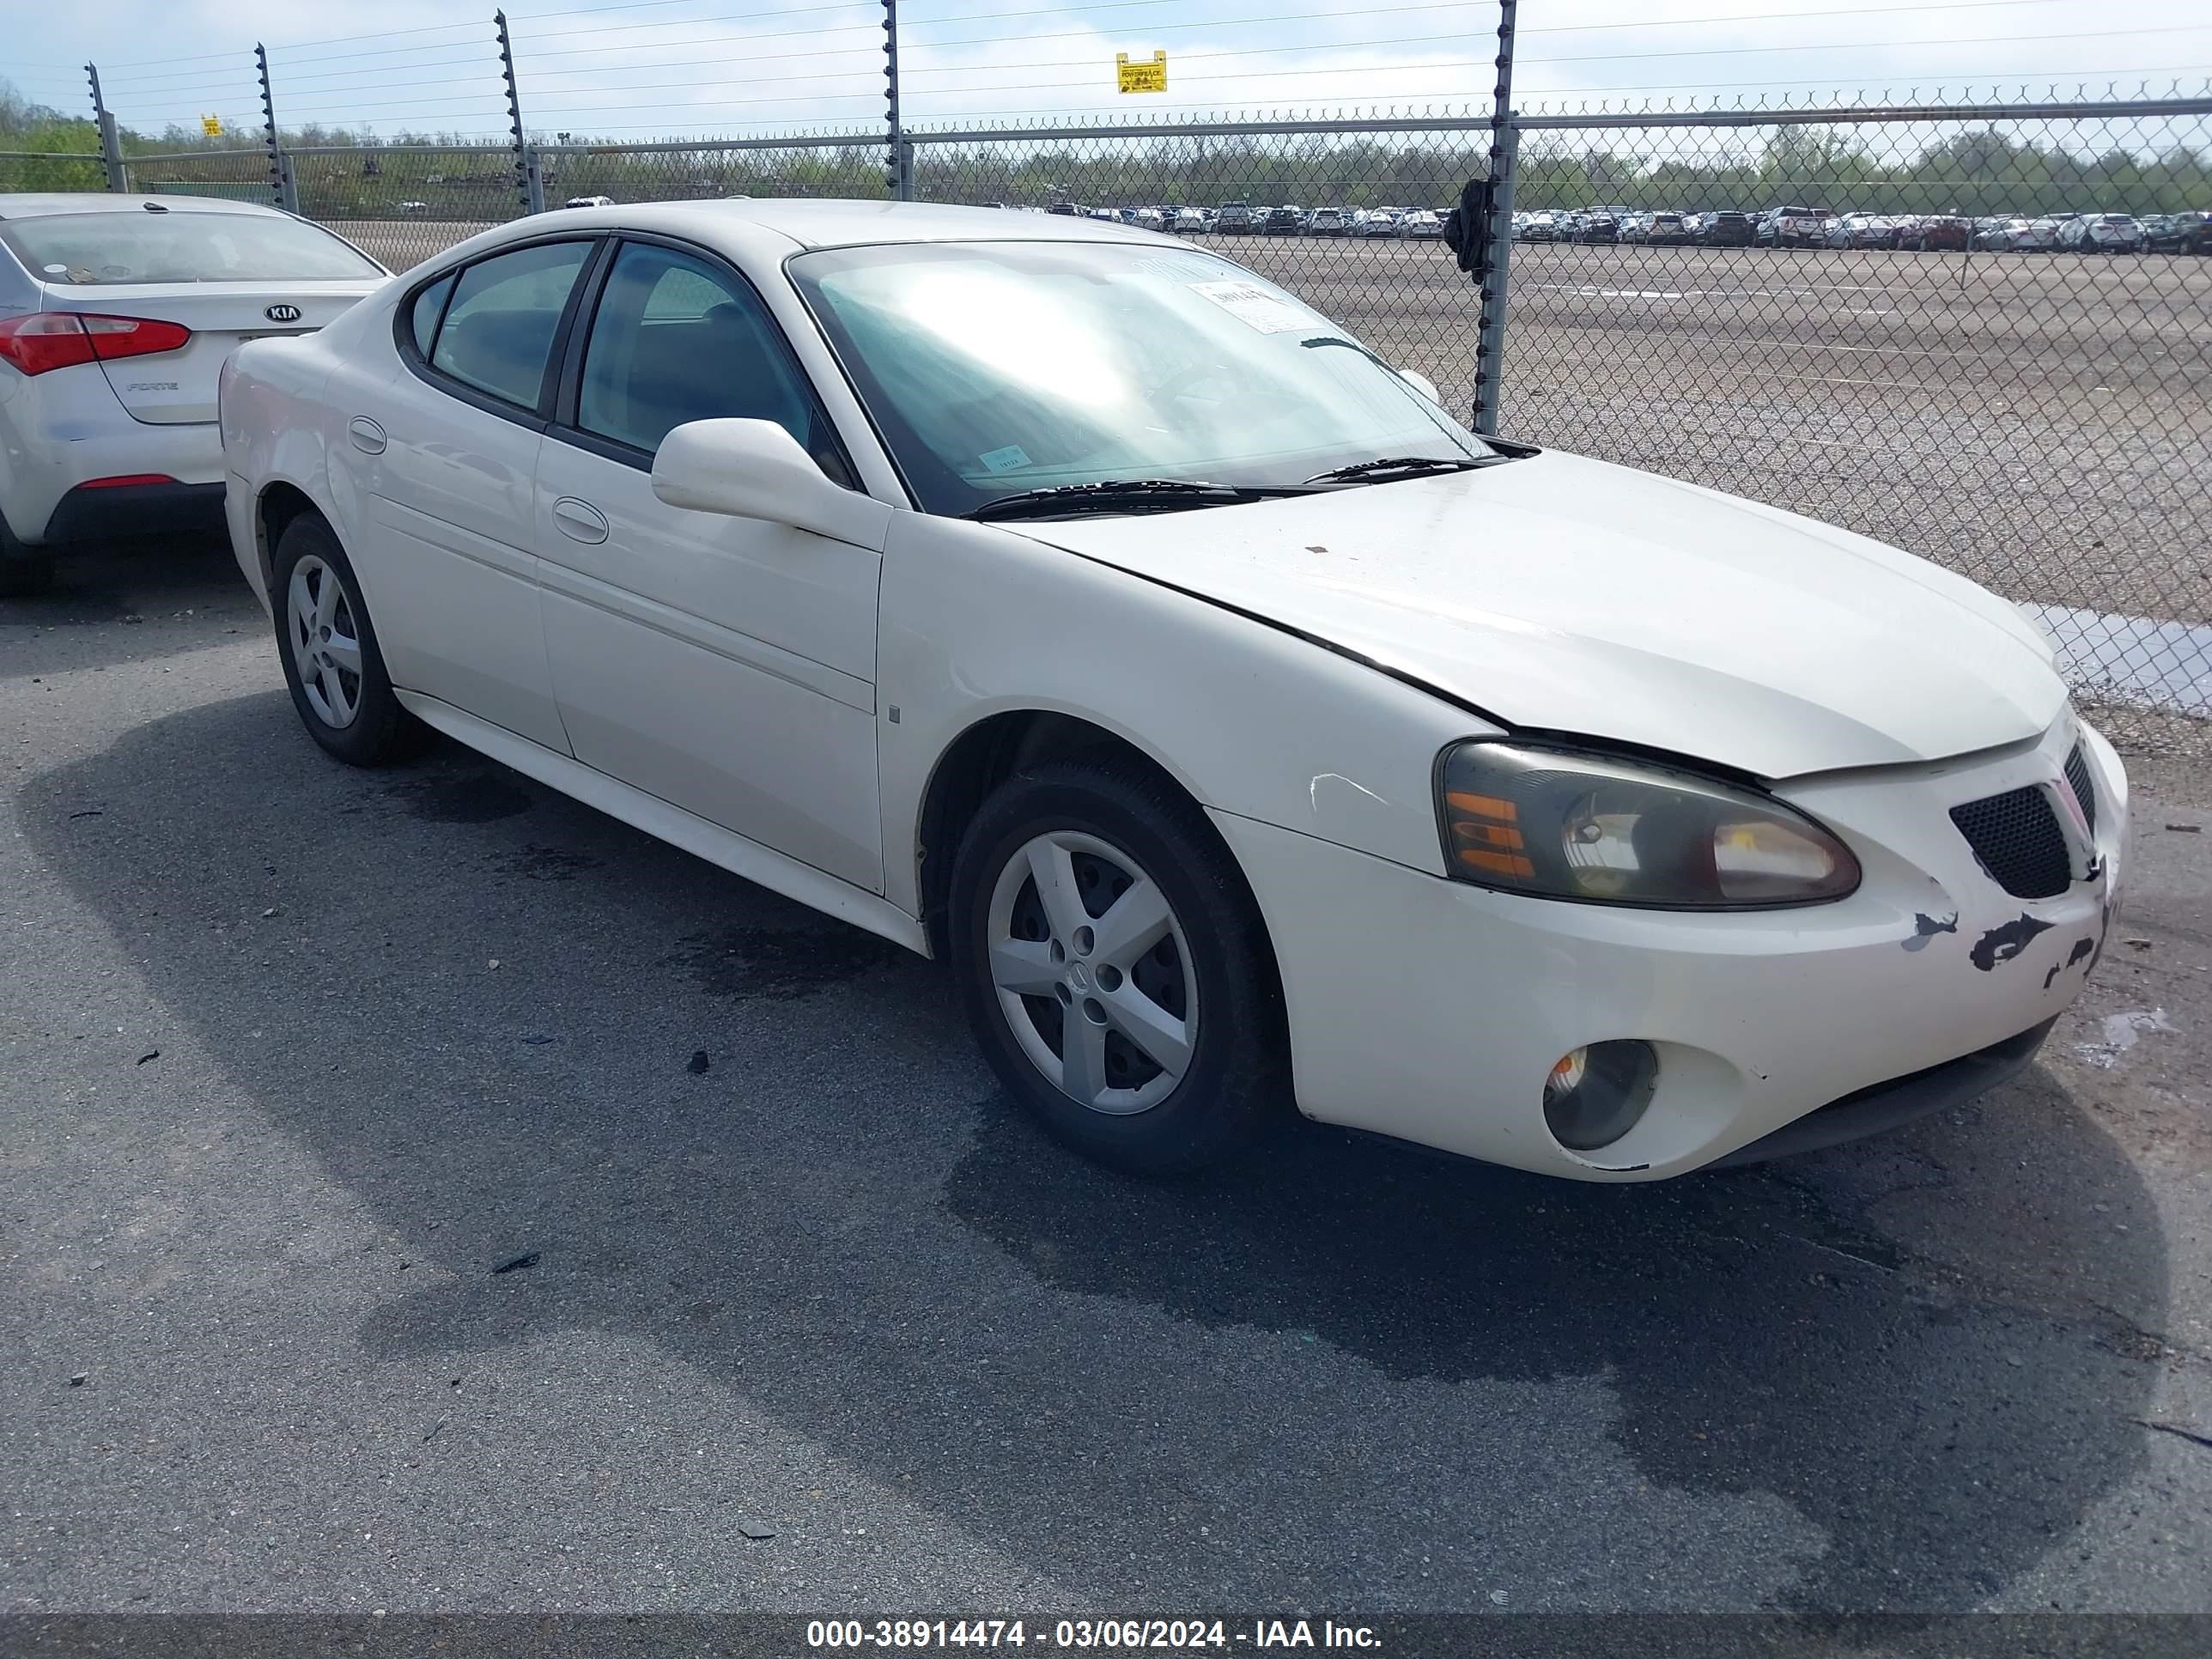 vin: 2G2WP552581132589 2G2WP552581132589 2008 pontiac grand prix 3800 for Sale in 70126, 6600 Almonaster Ave, New Orleans, Louisiana, USA